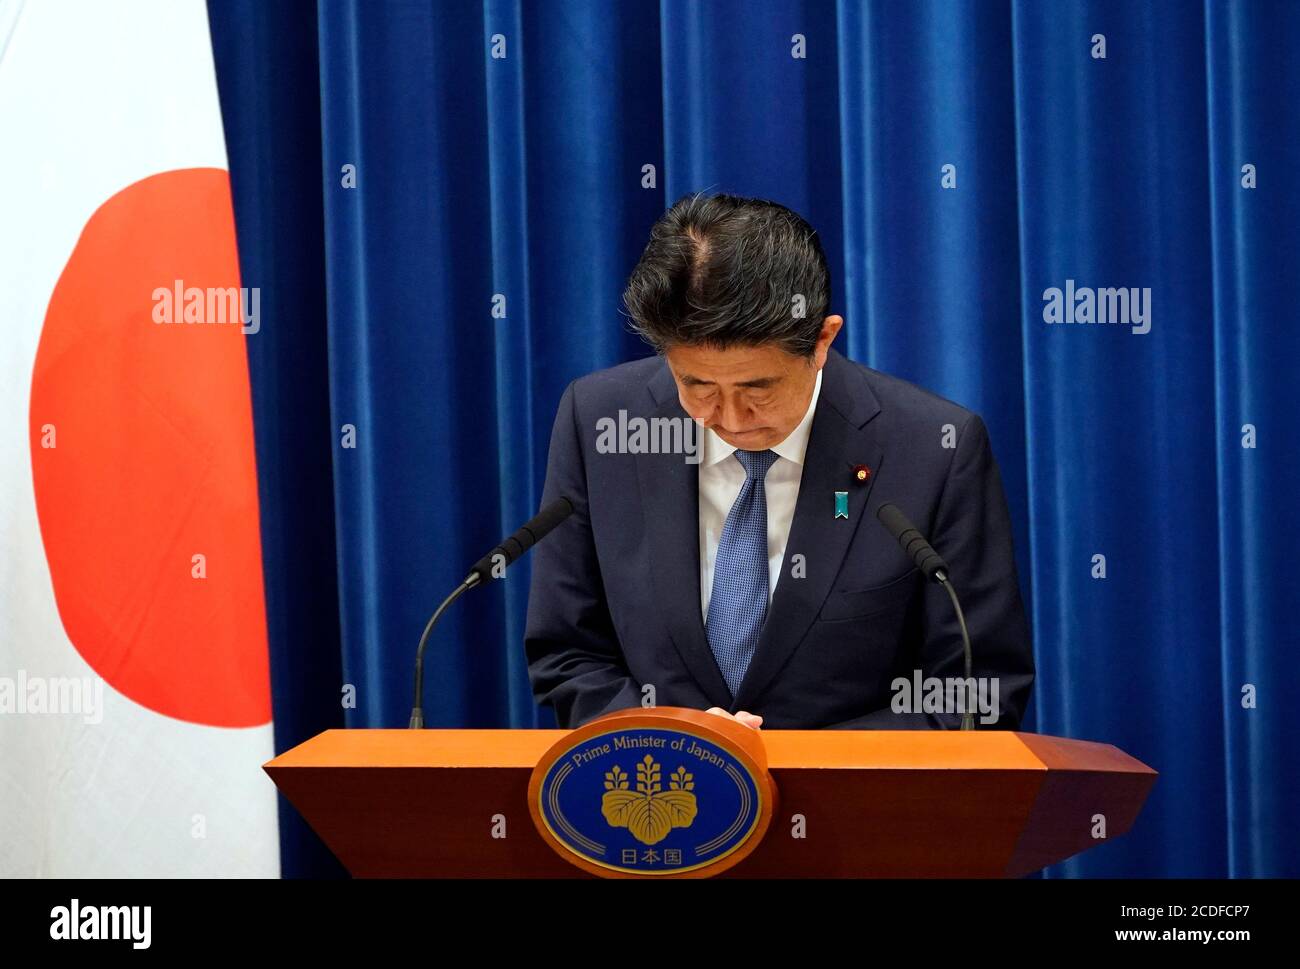 Tokyo, Japan. 28th Aug, 2020. Japanese Prime Minister Shinzo Abe bows during a press conference in Tokyo, Japan, Aug. 28, 2020. Japanese Prime Minister Shinzo Abe has said at a press conference on Friday that he will step down from his post due to health concerns. (Franck Robichon/Pool via Xinhua) Credit: Xinhua/Alamy Live News Stock Photo